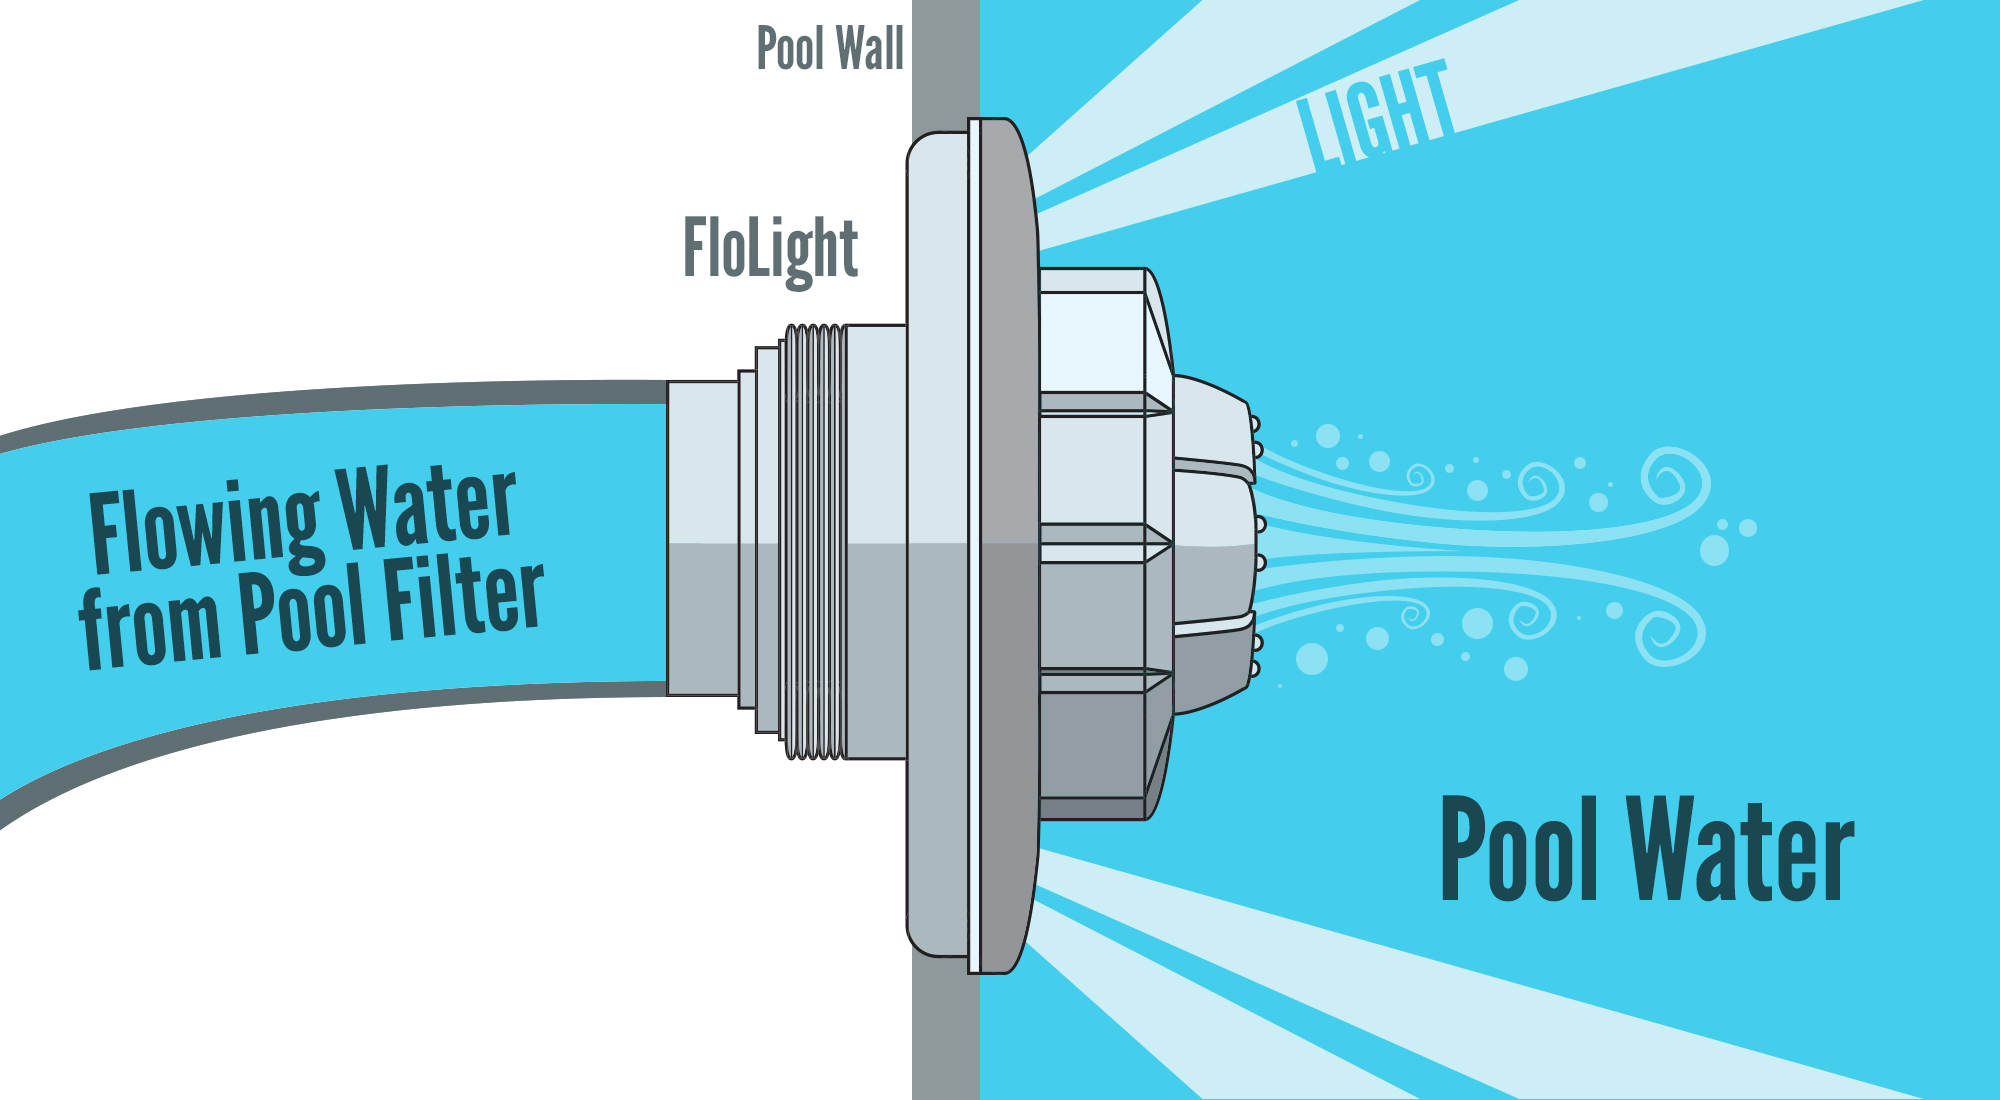 FLOLight Wireless Pool Light for Inground & Above Ground Pools